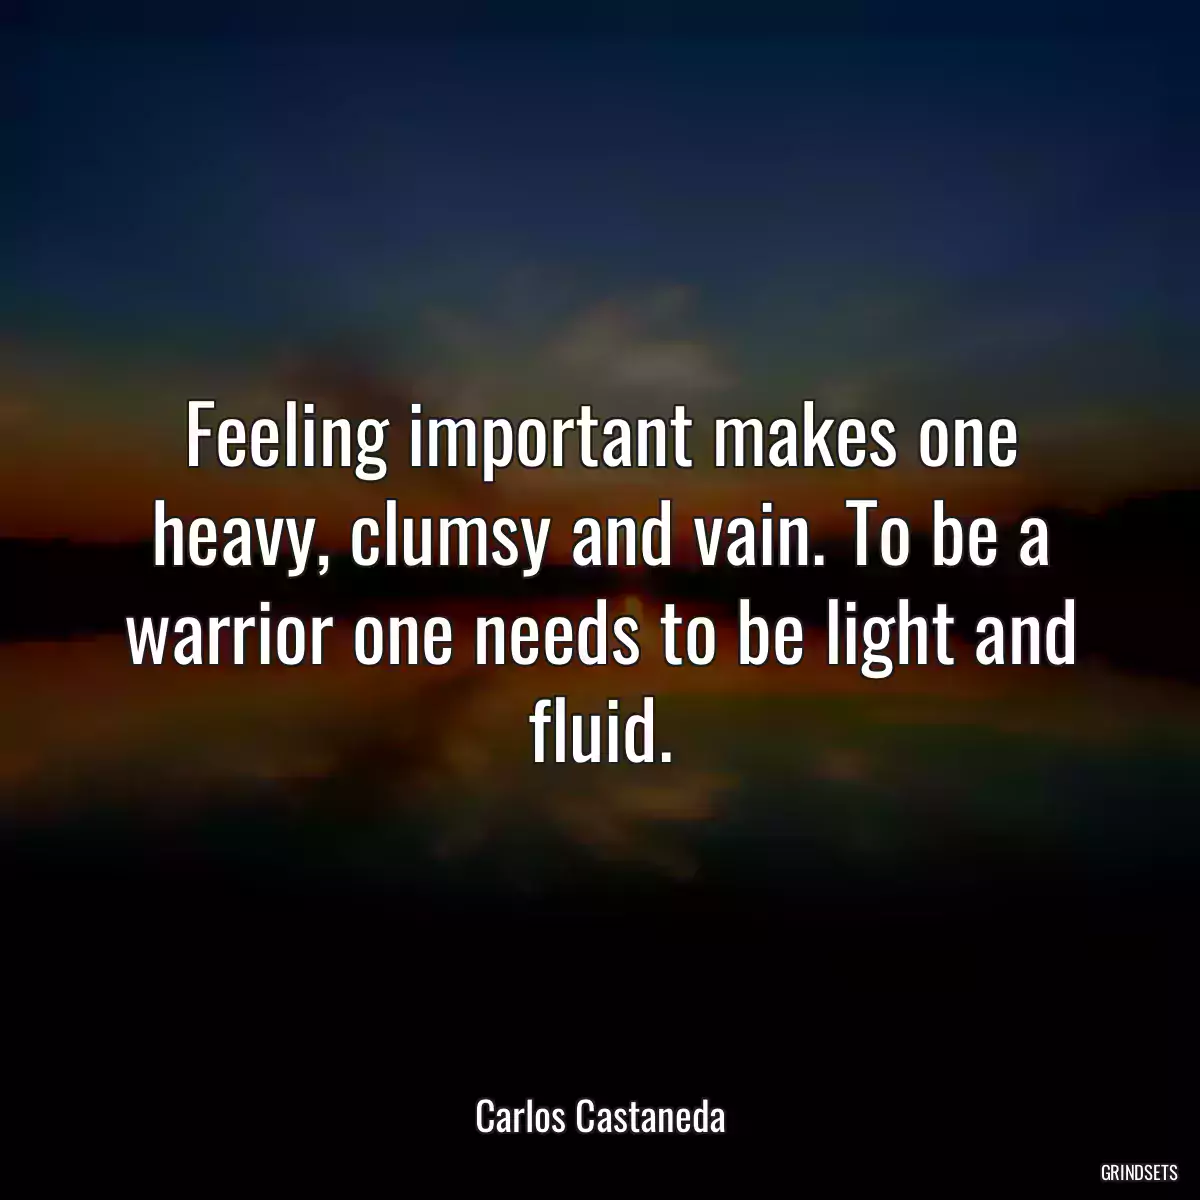 Feeling important makes one heavy, clumsy and vain. To be a warrior one needs to be light and fluid.